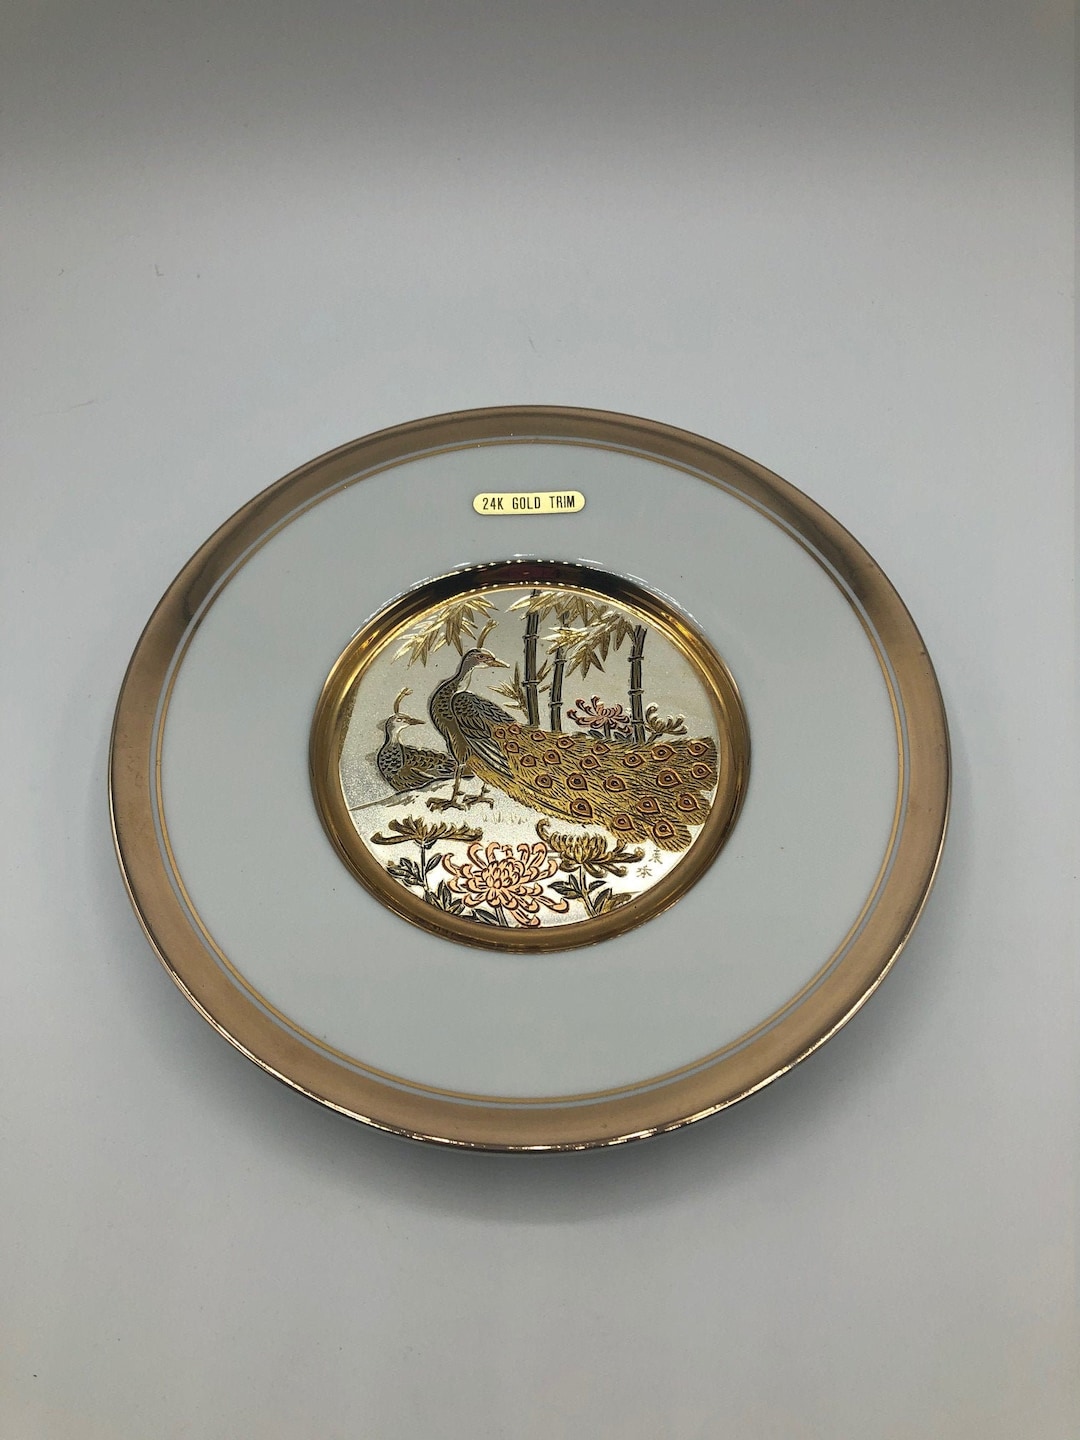 Japanese Chokin Art Collectible Plate, 24K Gold Trim. Original Engraved Art  Showing Peacocks, Flowers and Trees Gilded in Silver and Gold. 